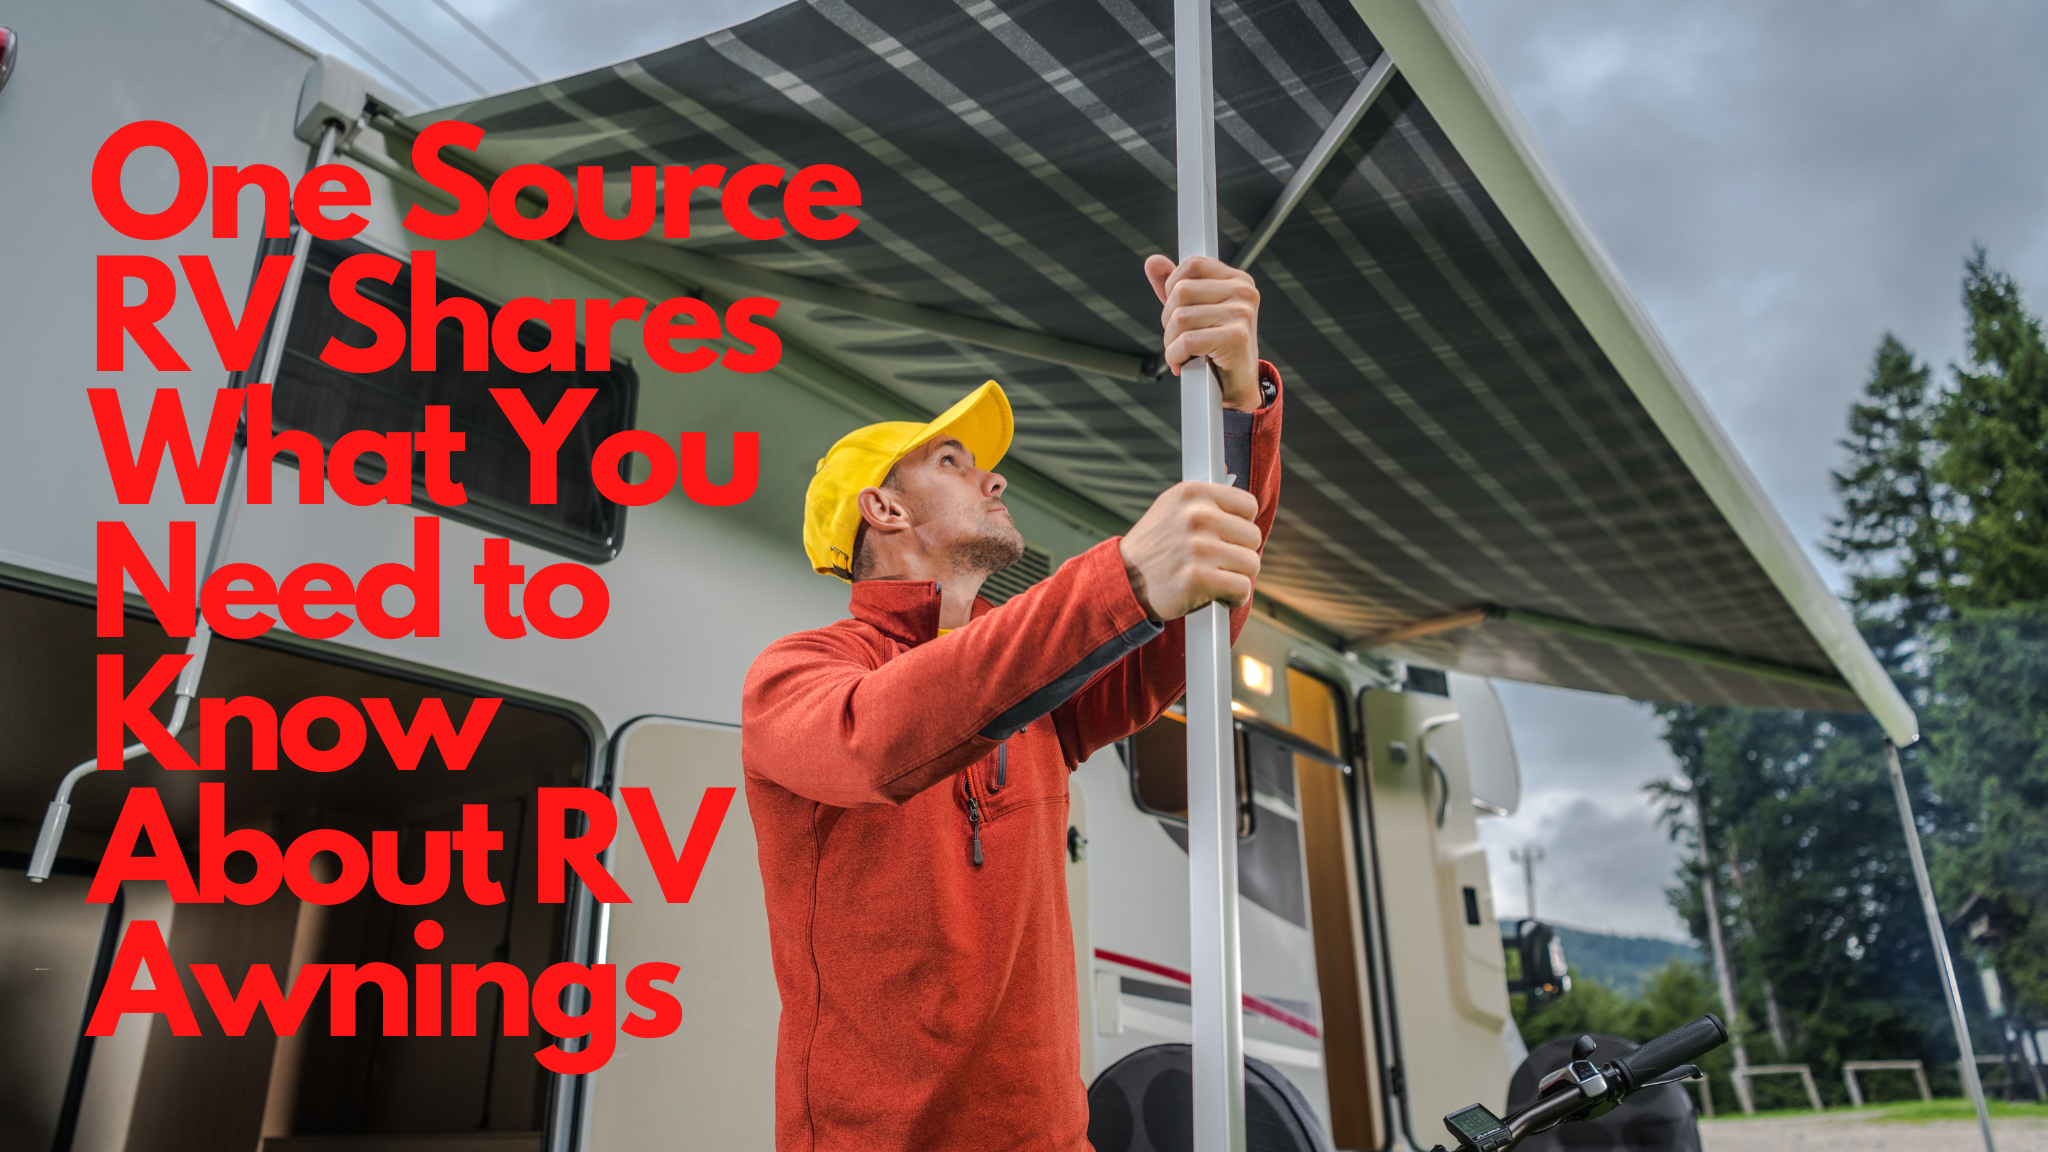 One Source RV Shares What You Need to Know About RV Awnings